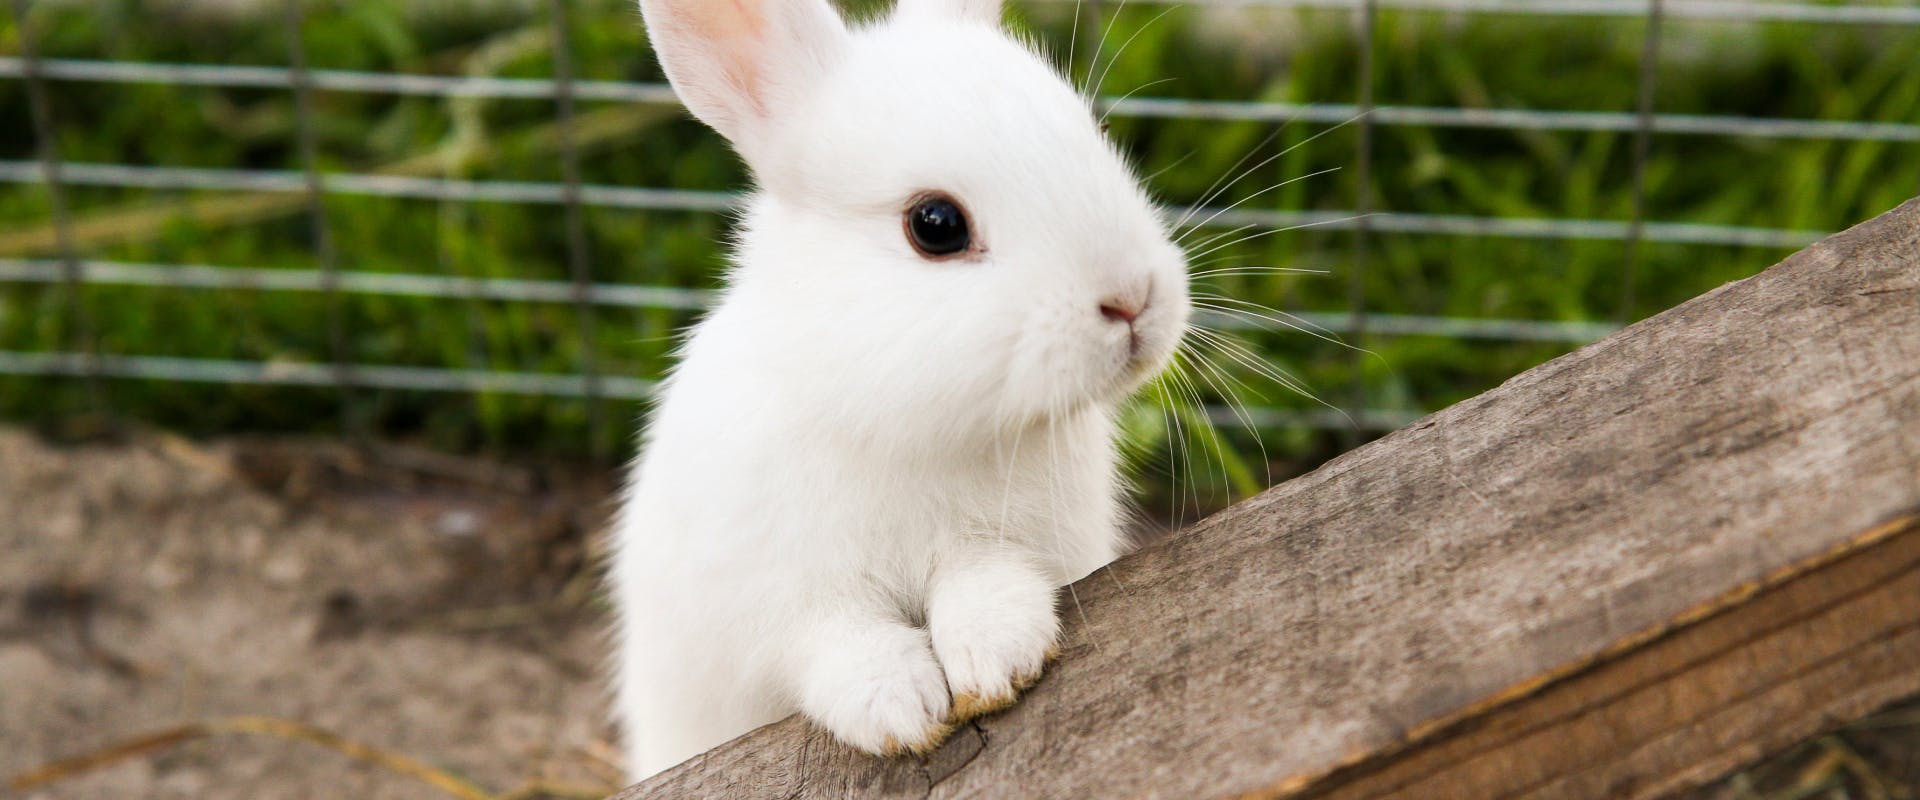 a small white rabbit on a bunny boarding cage with its front paws resting on a plank of wood